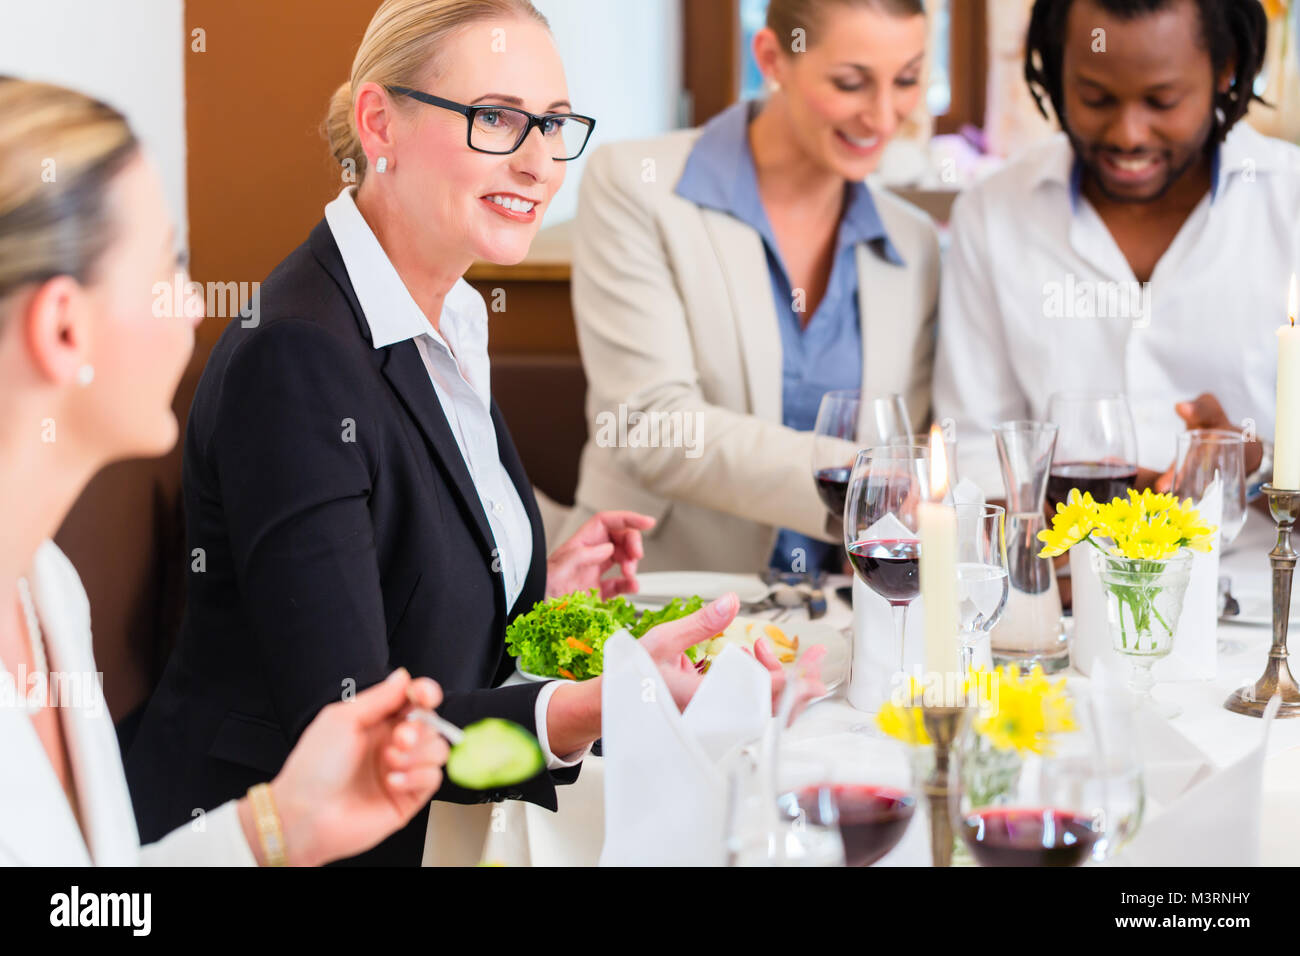 Business lunch in restaurant with food and wine Stock Photo